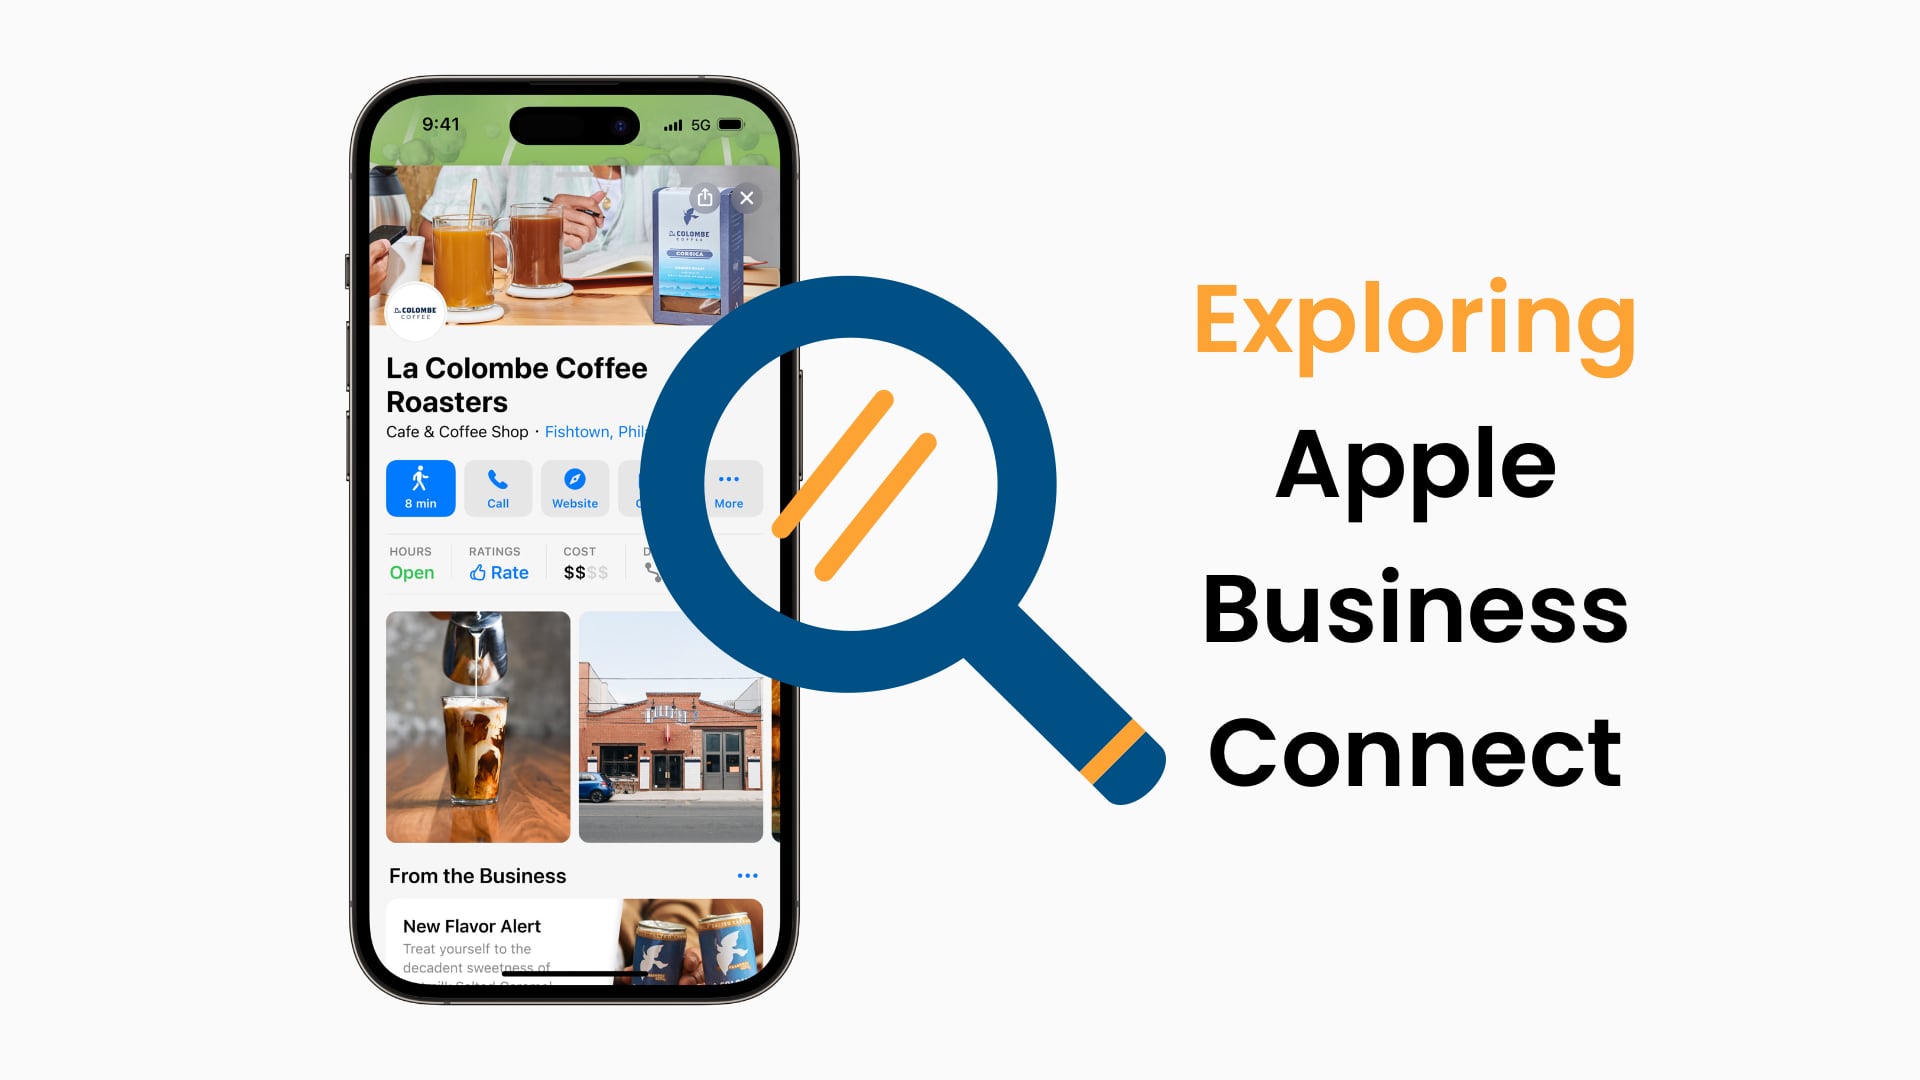 Exploring Apple Business Connect